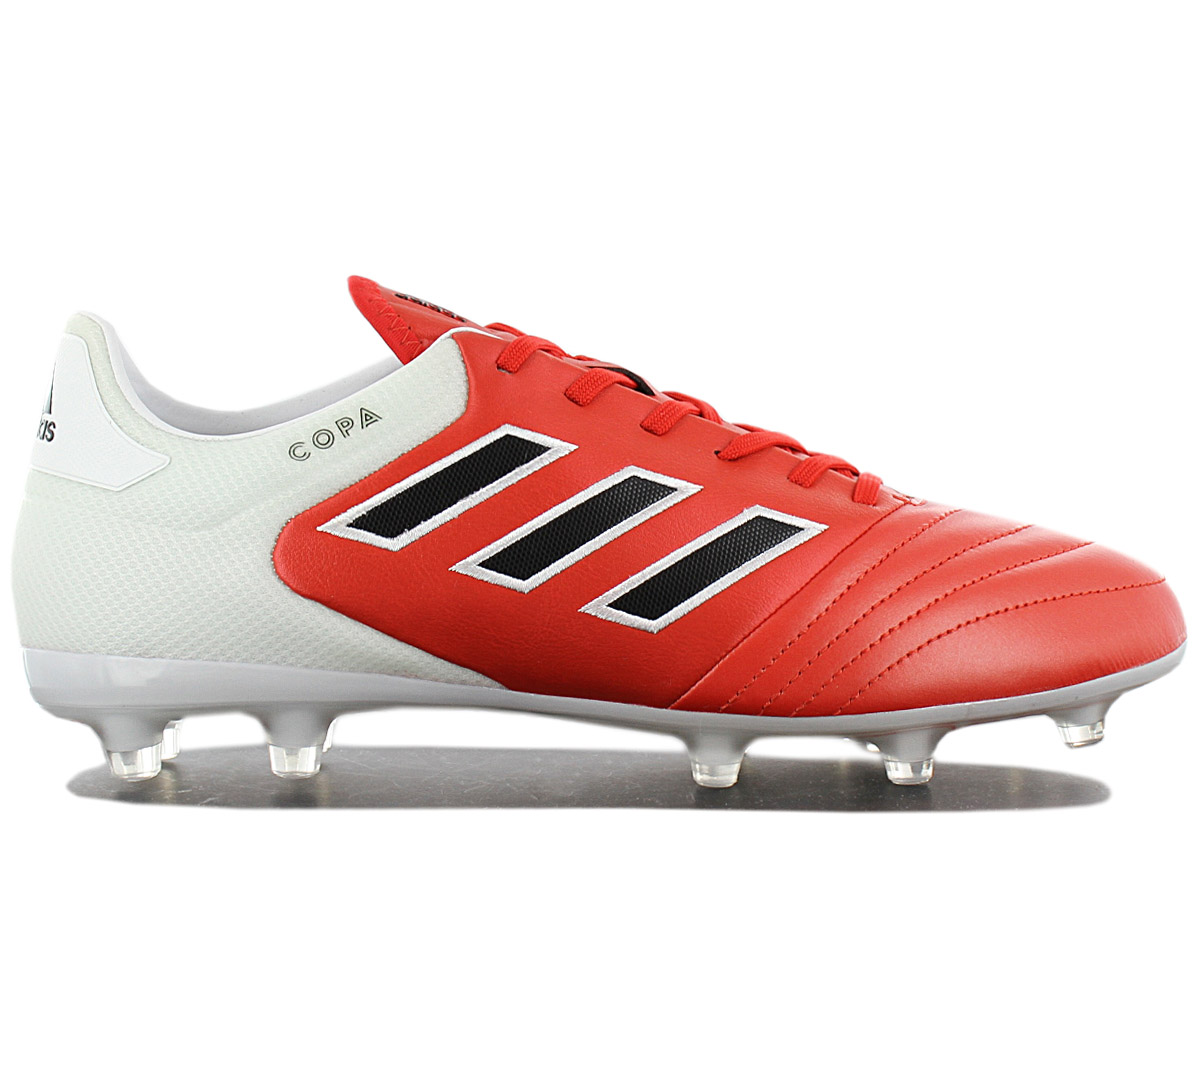 Adidas Copa 17.2 Fg Men's Cam Shoes Leather Red BB3553 Mundial New 